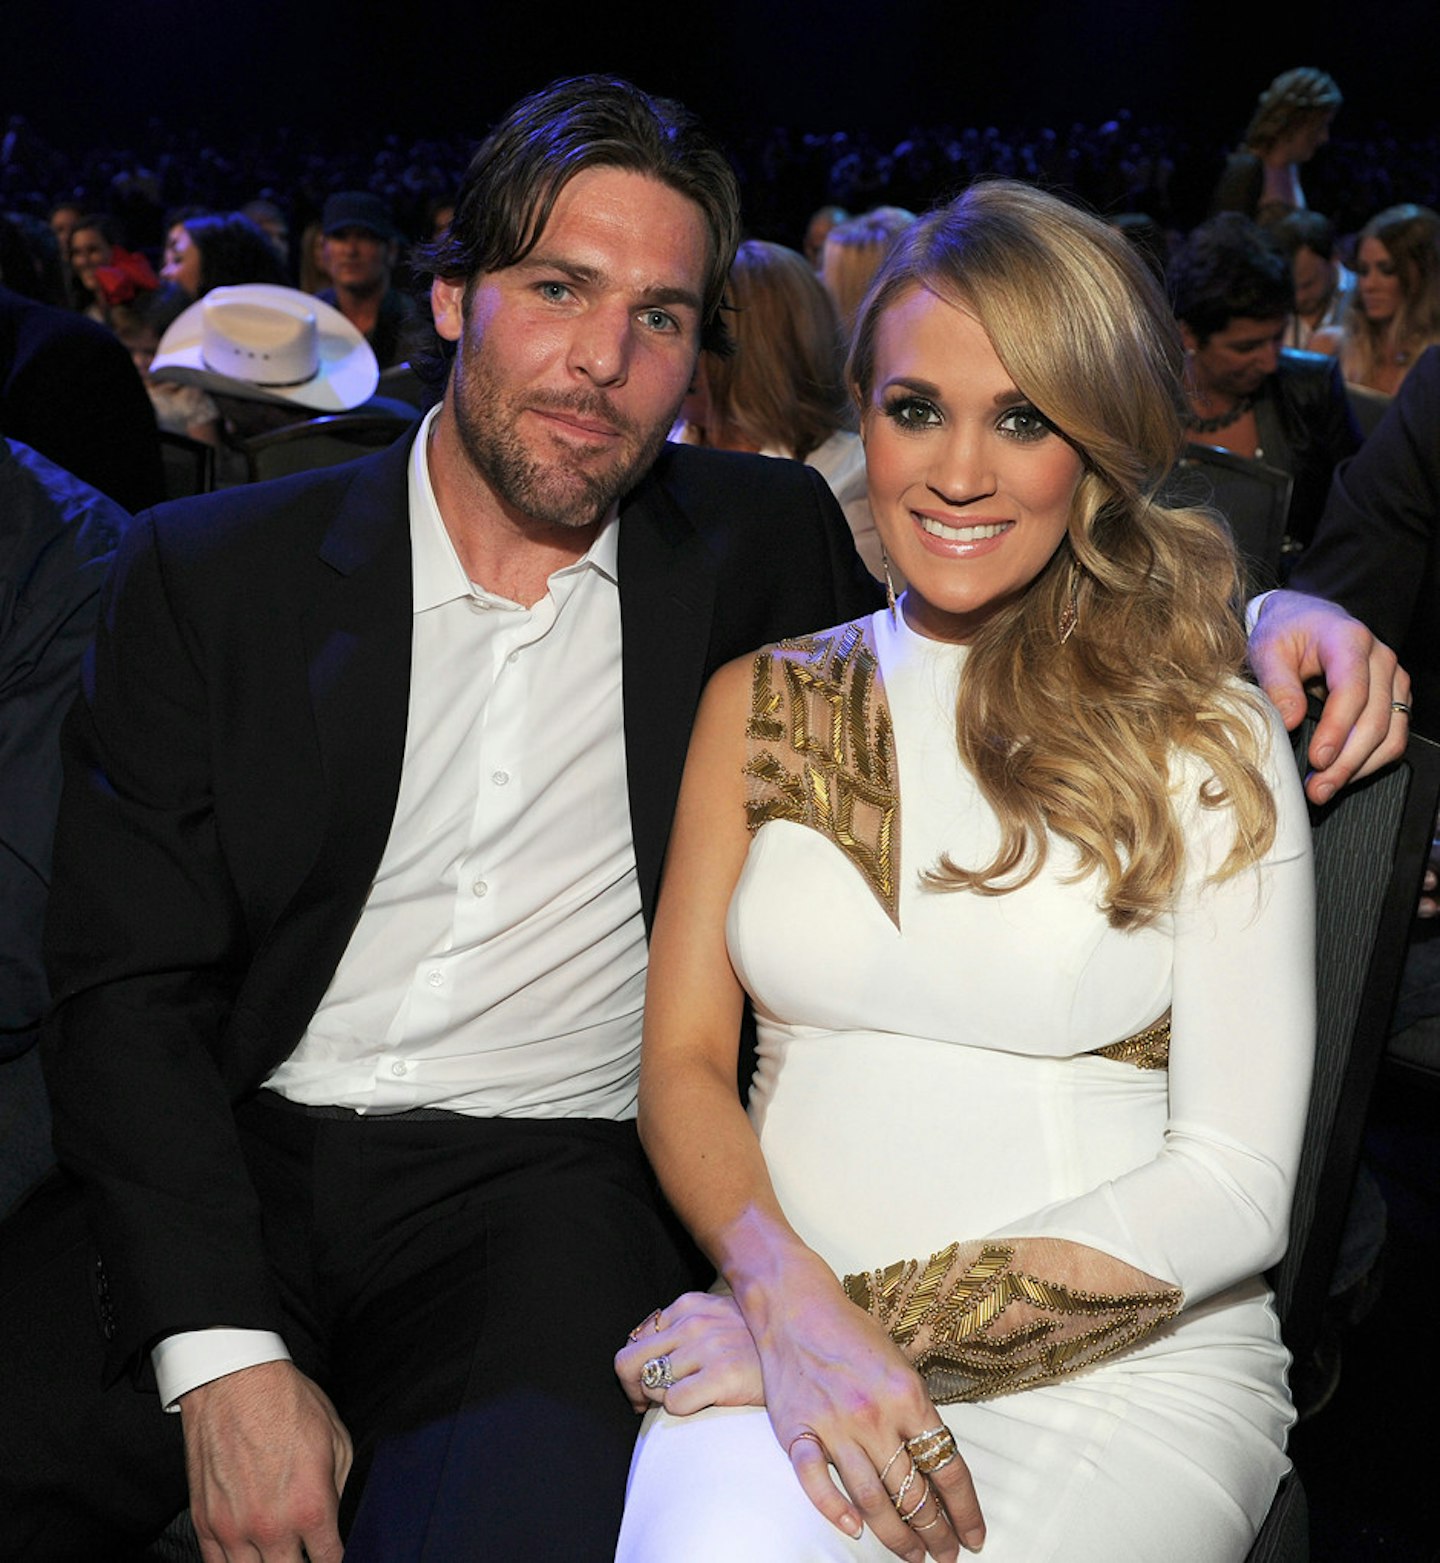 Carrie Underwood's baby is here: Singer gives birth to baby boy